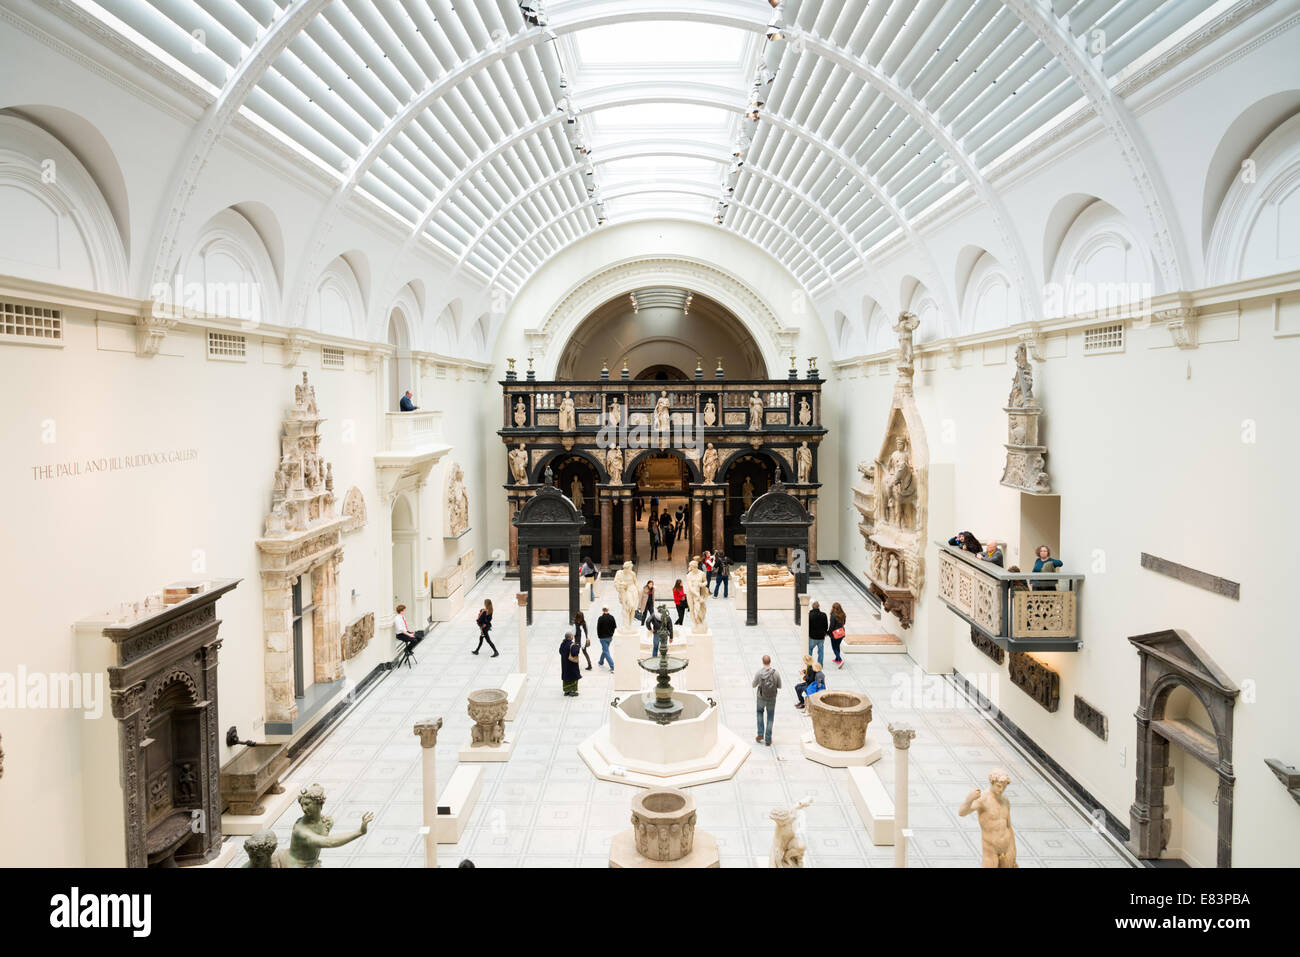 Paul and Jill Ruddock Gallery in the Victoria and Albert Museum, London, UK Stock Photo